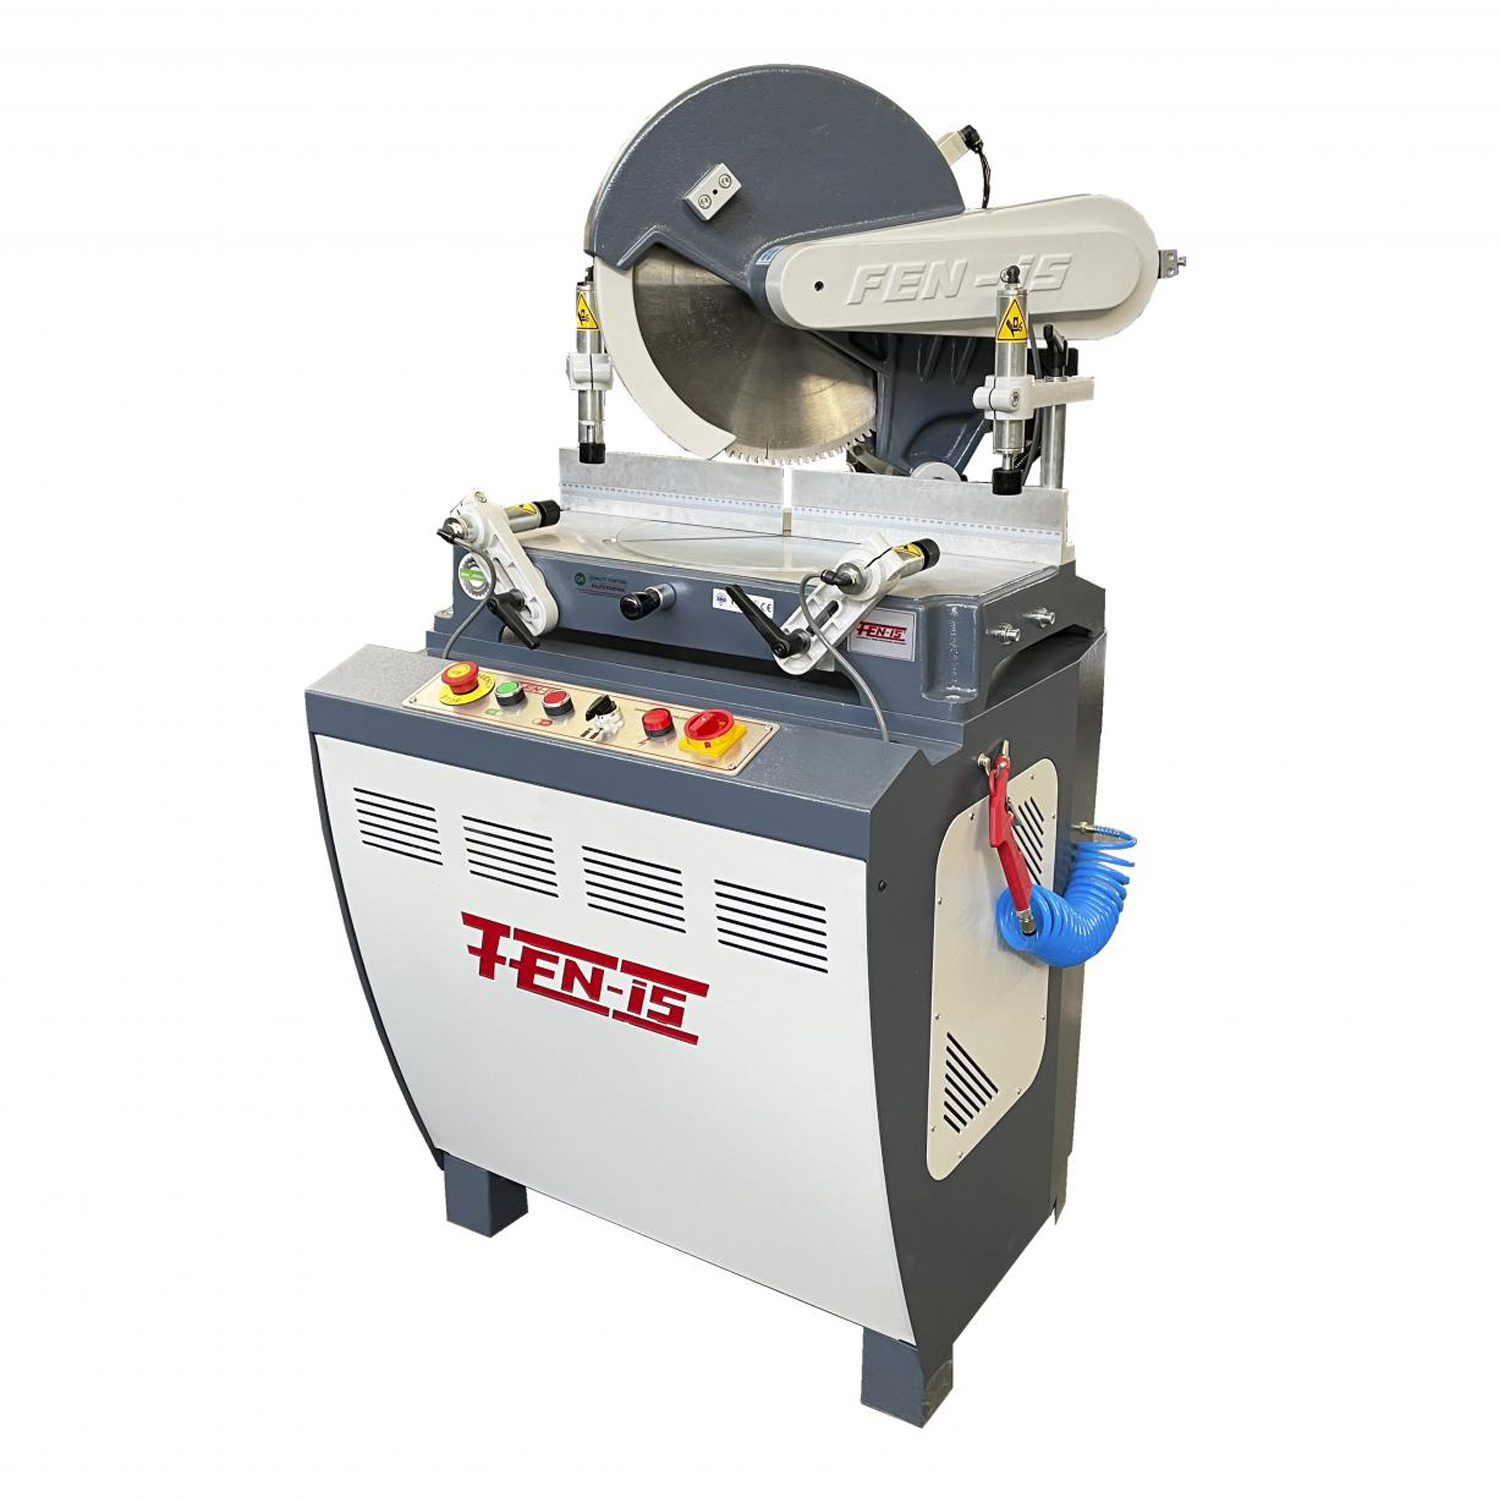 400mm Hydro Pneumatic Automatic Aluminium, PVC & Wood Profile Cutting Mitre Saw Machine 415V FN 400HP by Fen-Is